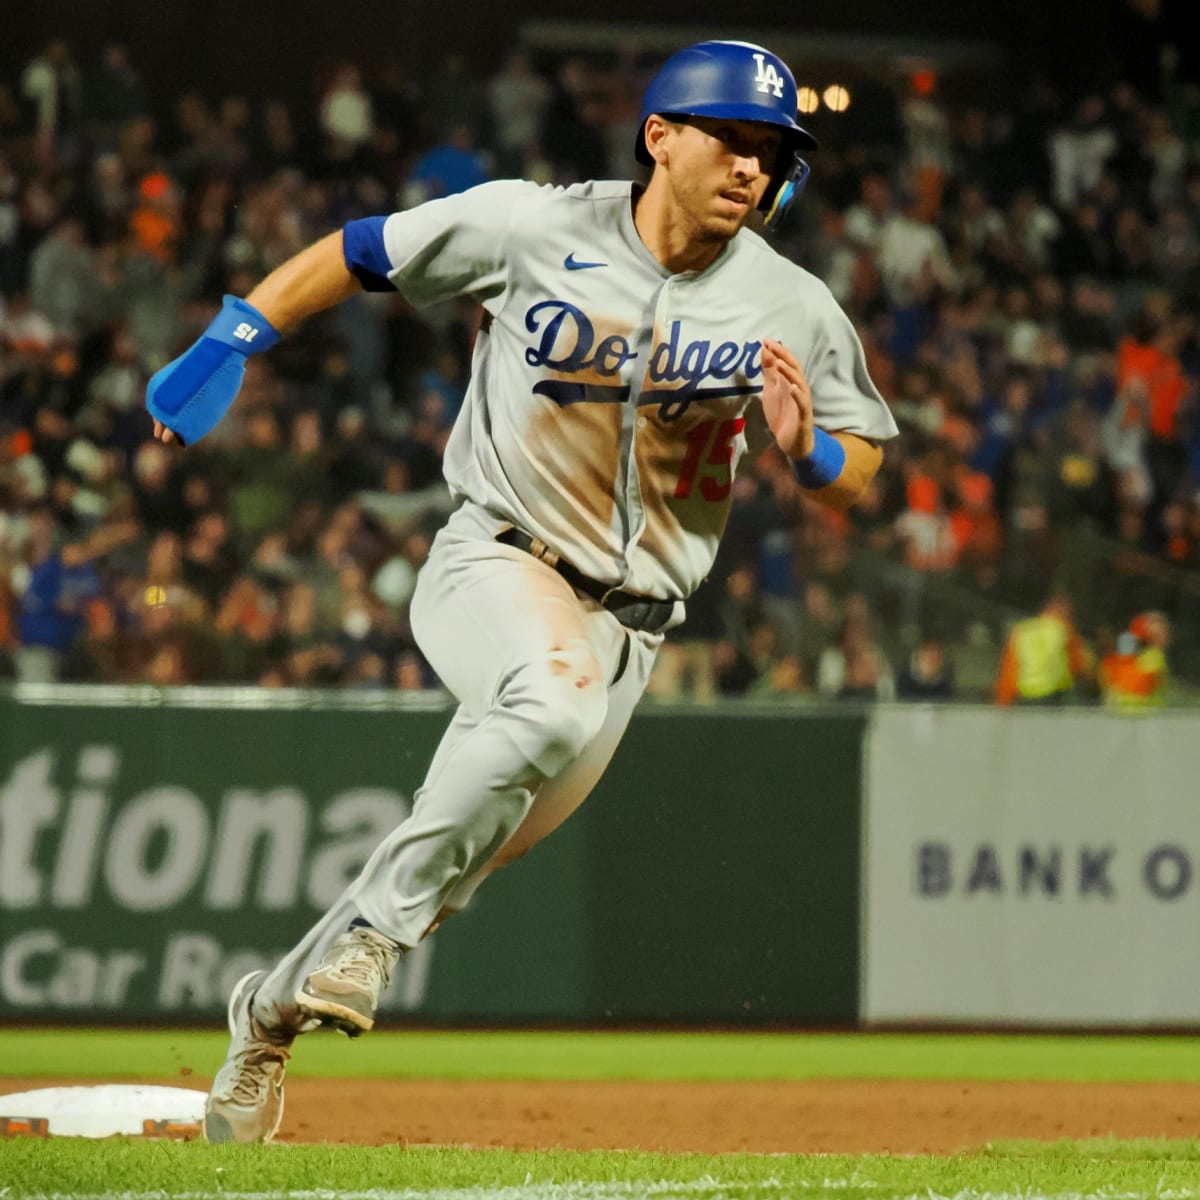 The Dodgers' bats have gone cold in the postseason. Now they're facing  playoff elimination – KXAN Austin